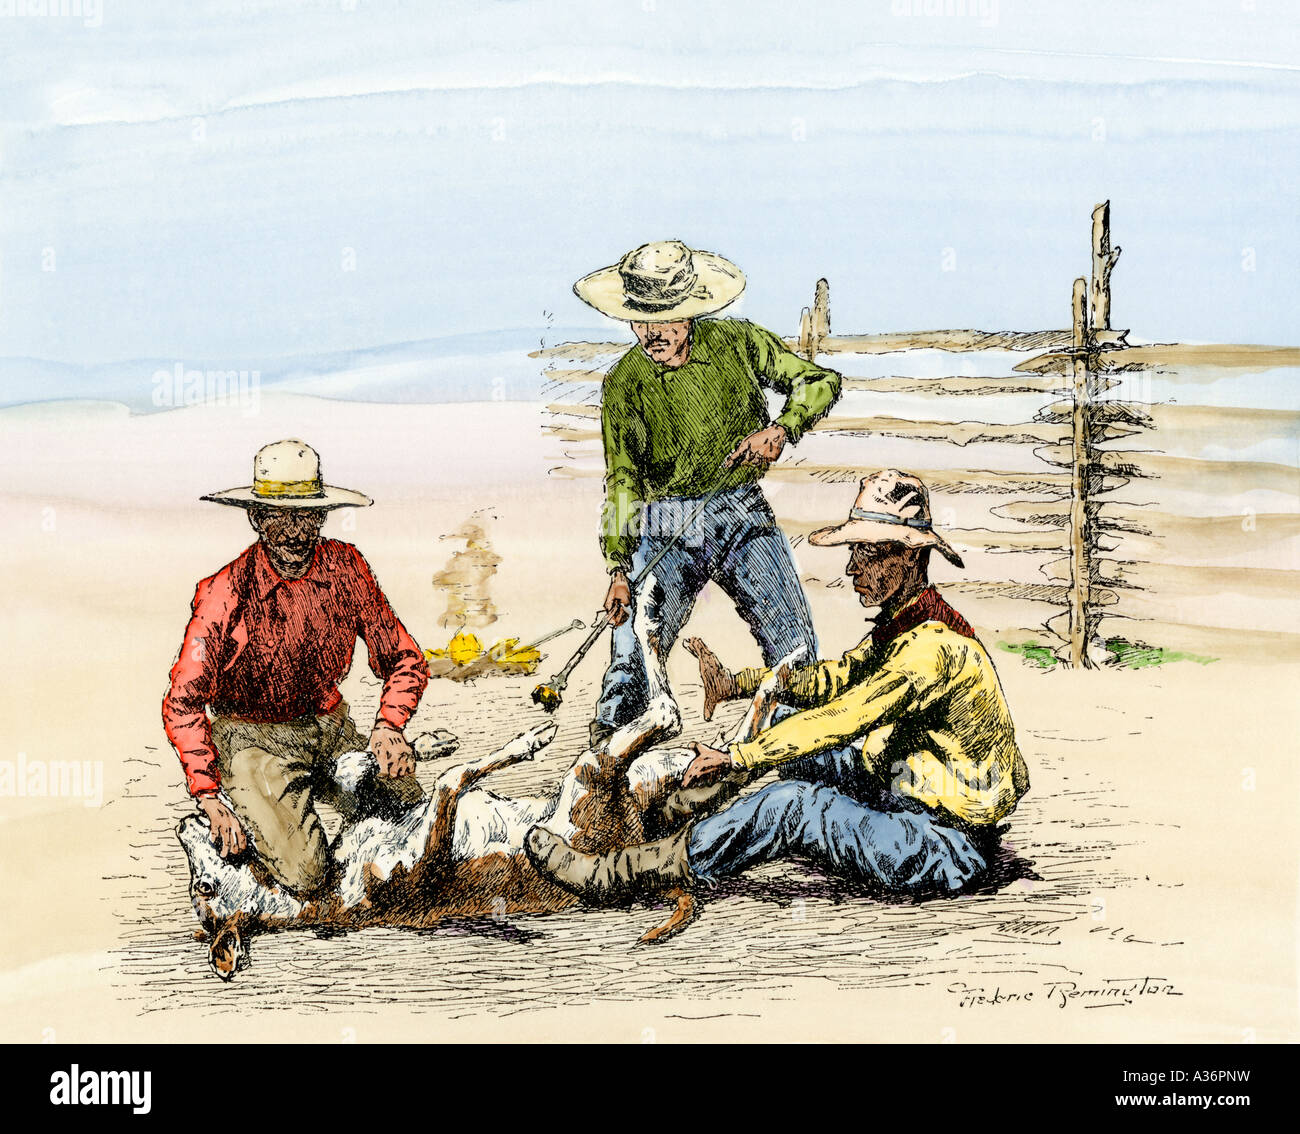 Three cowhands branding a calf 1800s. Hand-colored woodcut of a Frederic Remington illustration Stock Photo